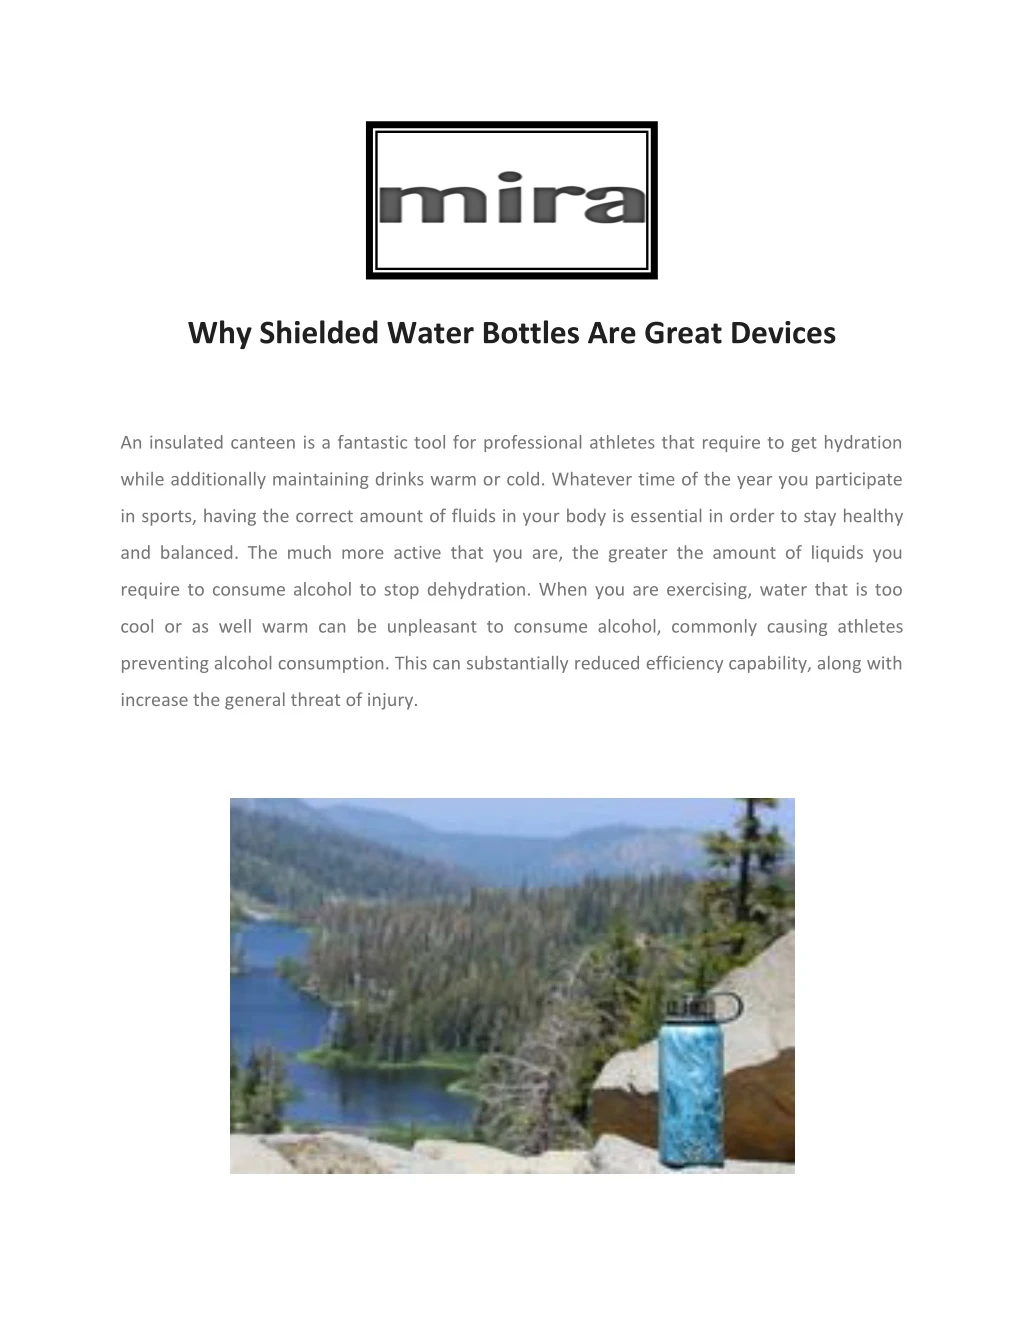 why shielded water bottles are great devices